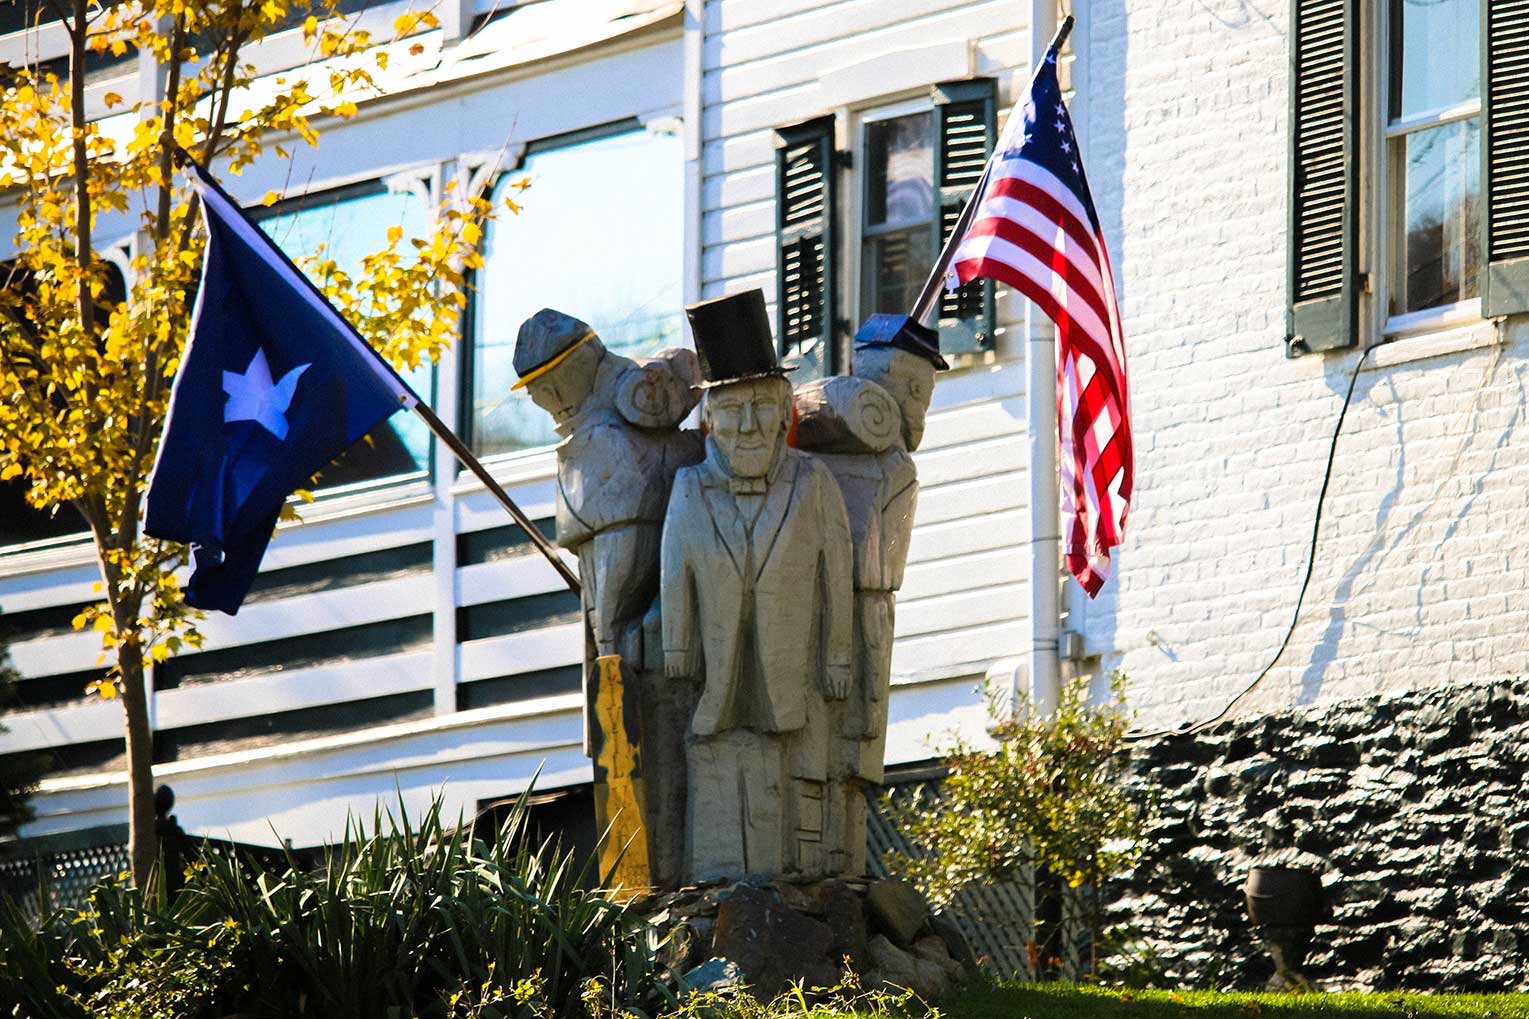 Statue with flags in Harper's Ferry, WV